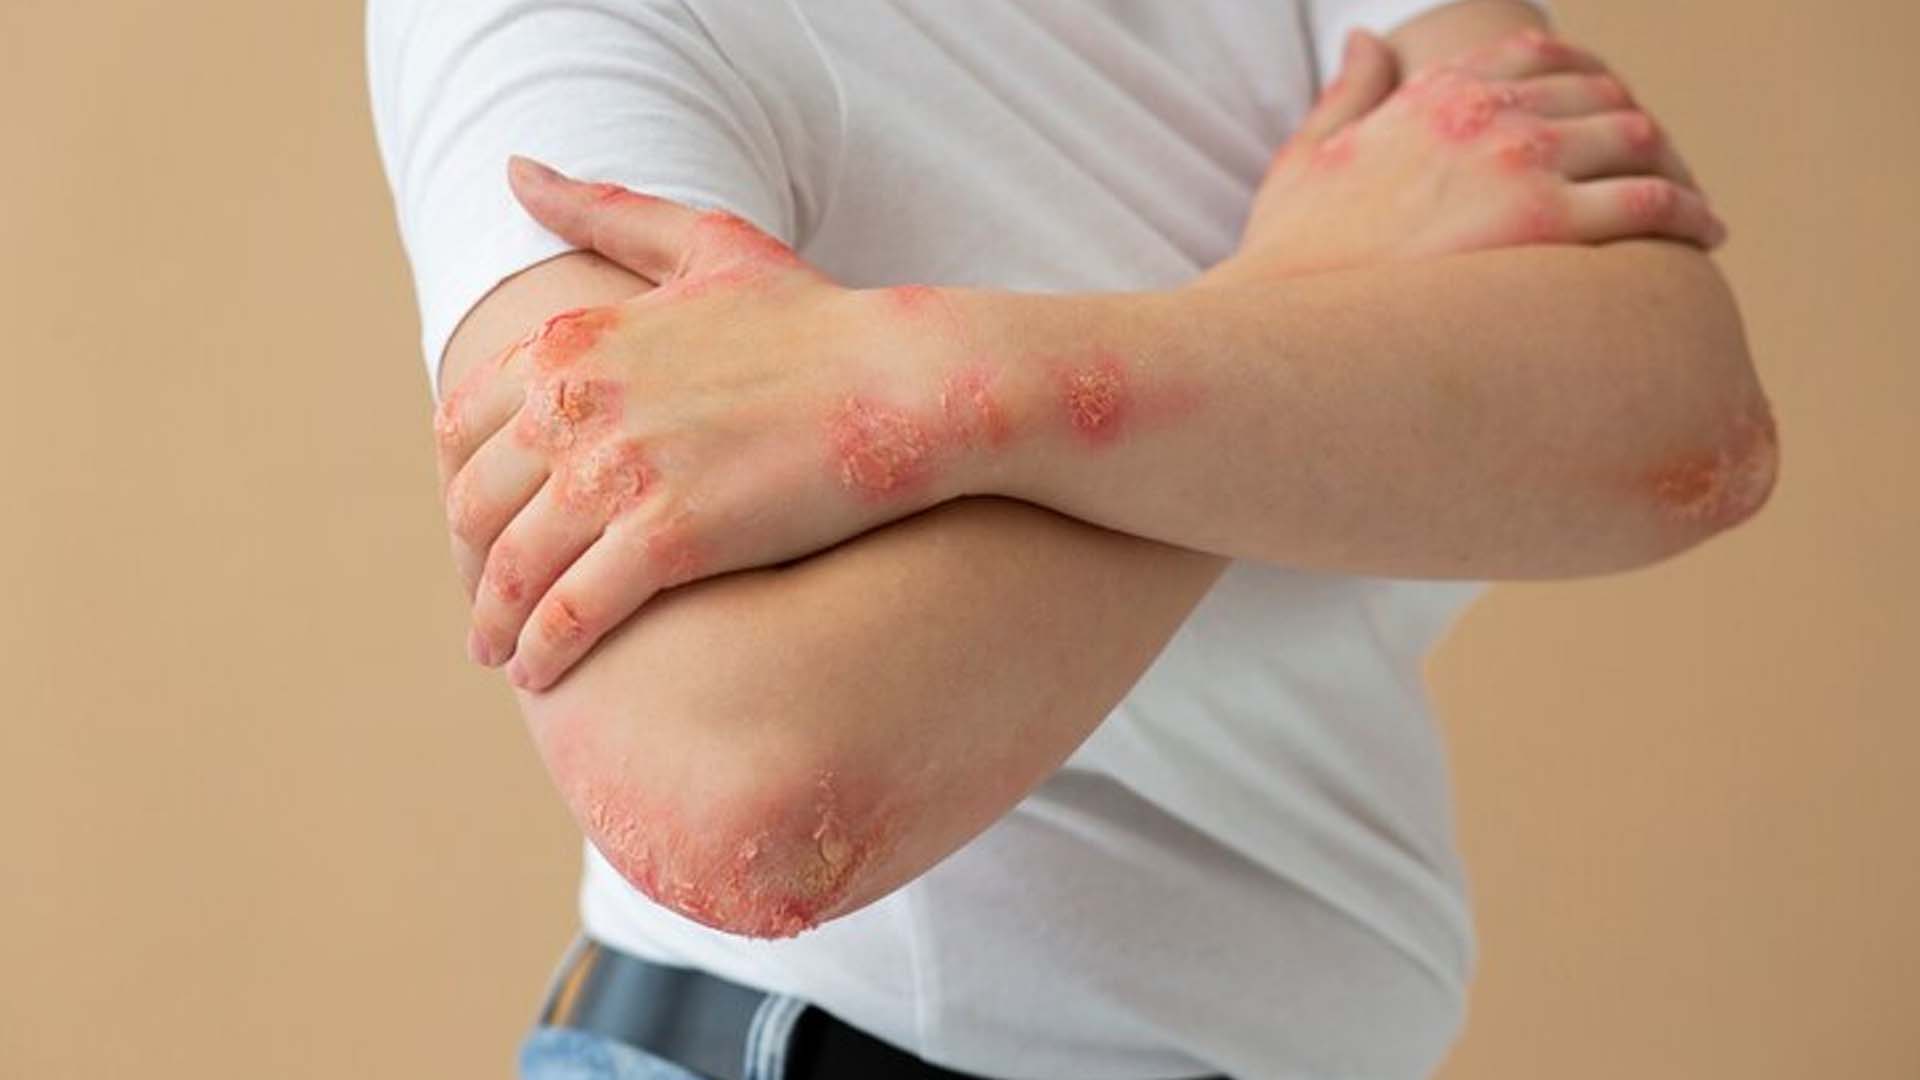 What are the Home Remedies for Keratosis Pilaris?